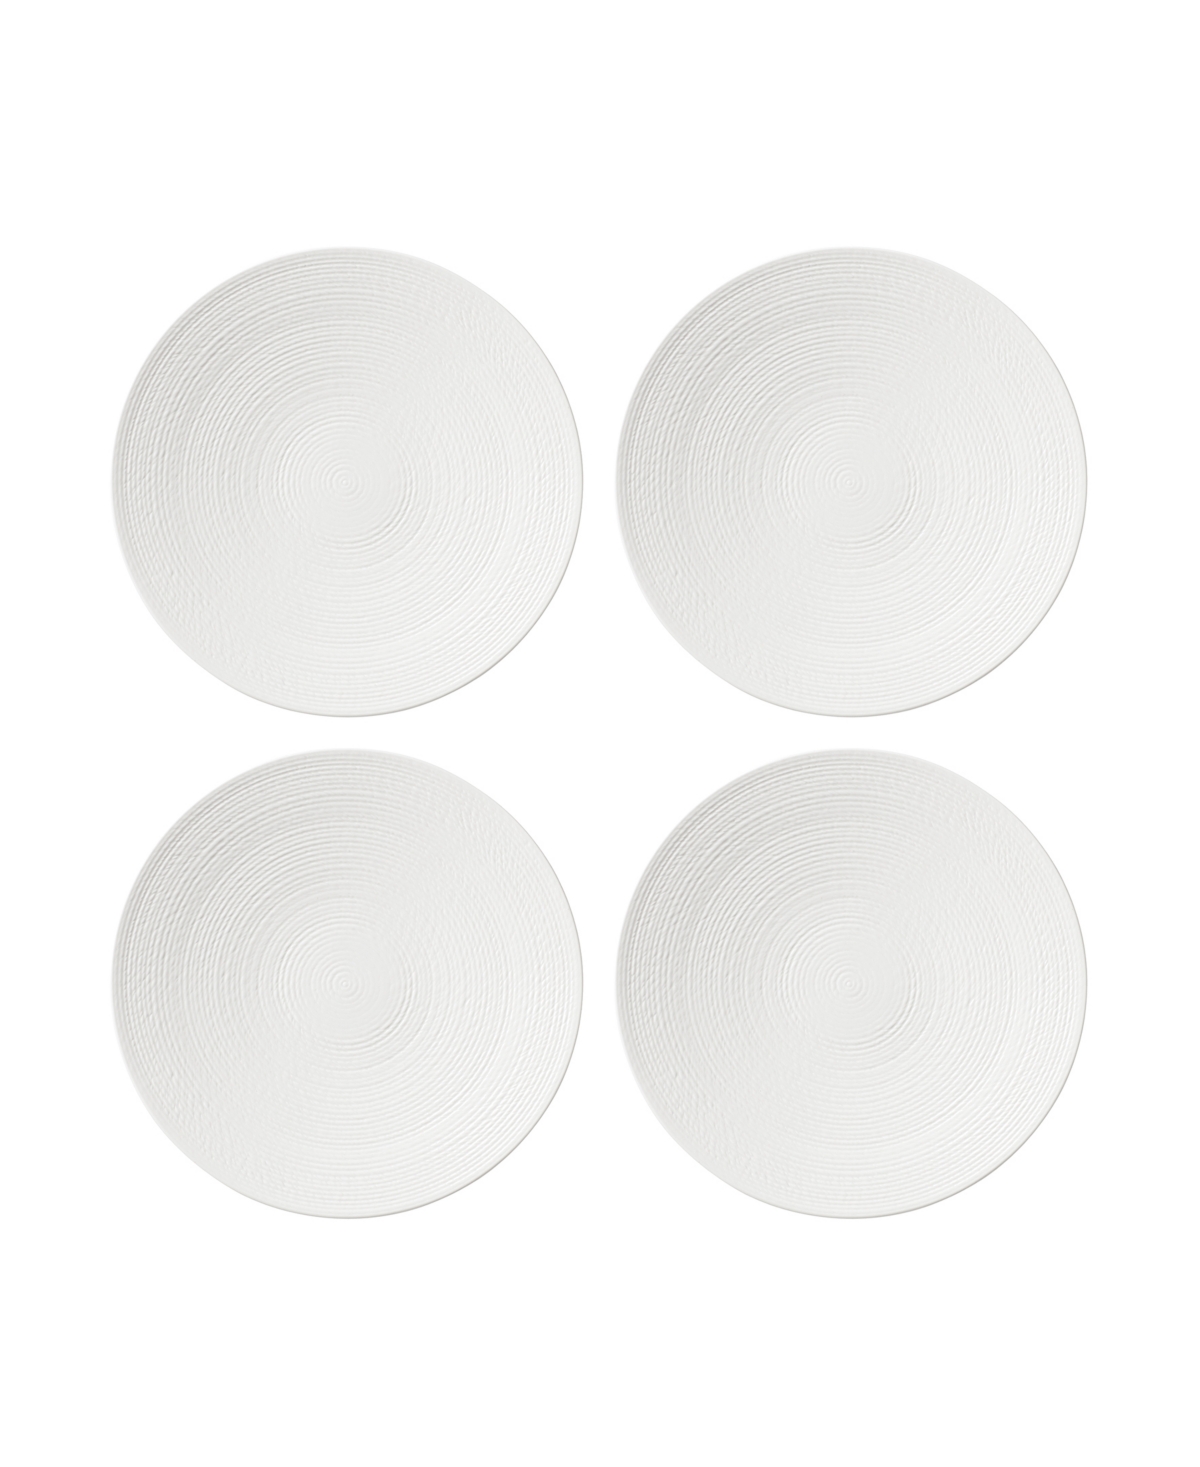 Lx Collective Accent Plates 4 Piece Set - White and Black